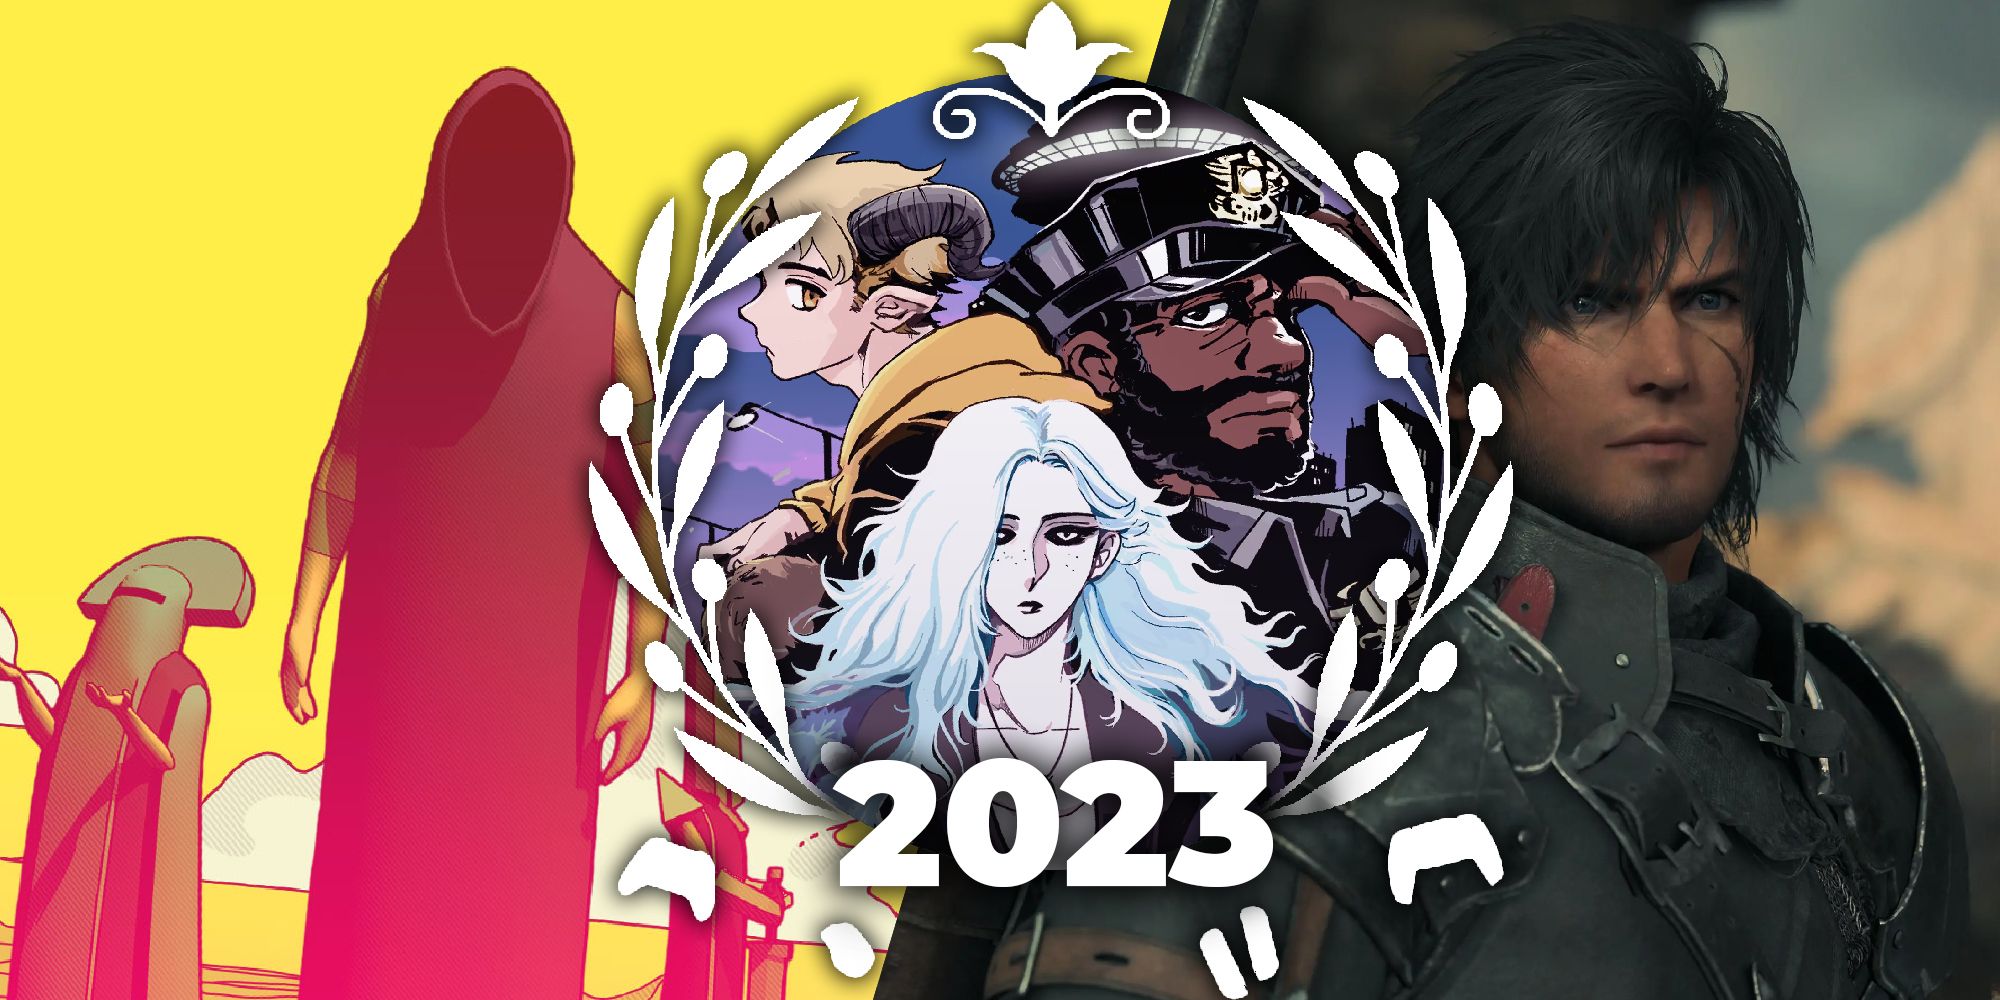 TheGamer's 2023 Editor's Pick laurels for David, featuring characters from Chants of Sennaar, Final Fantasy 16, and Coffee Talk Episode 2